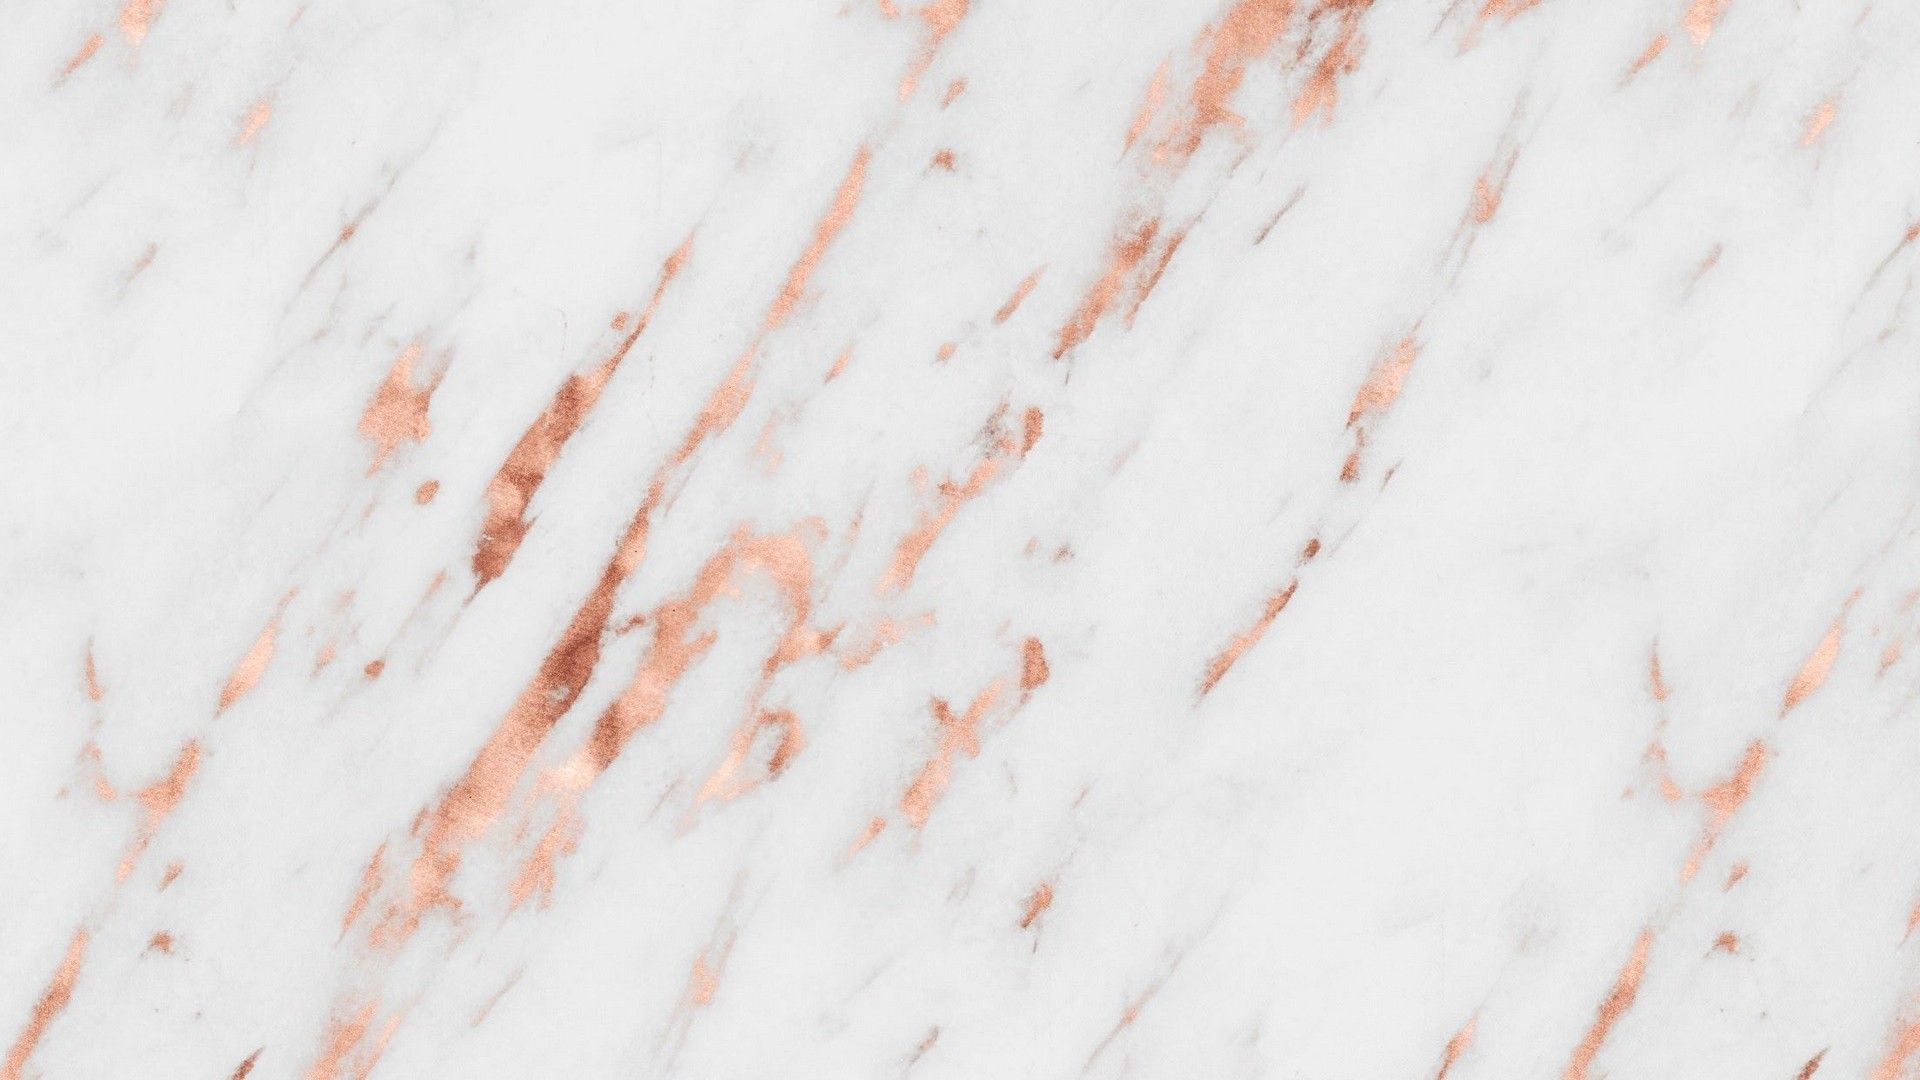 Marble Tumblr Backgrounds